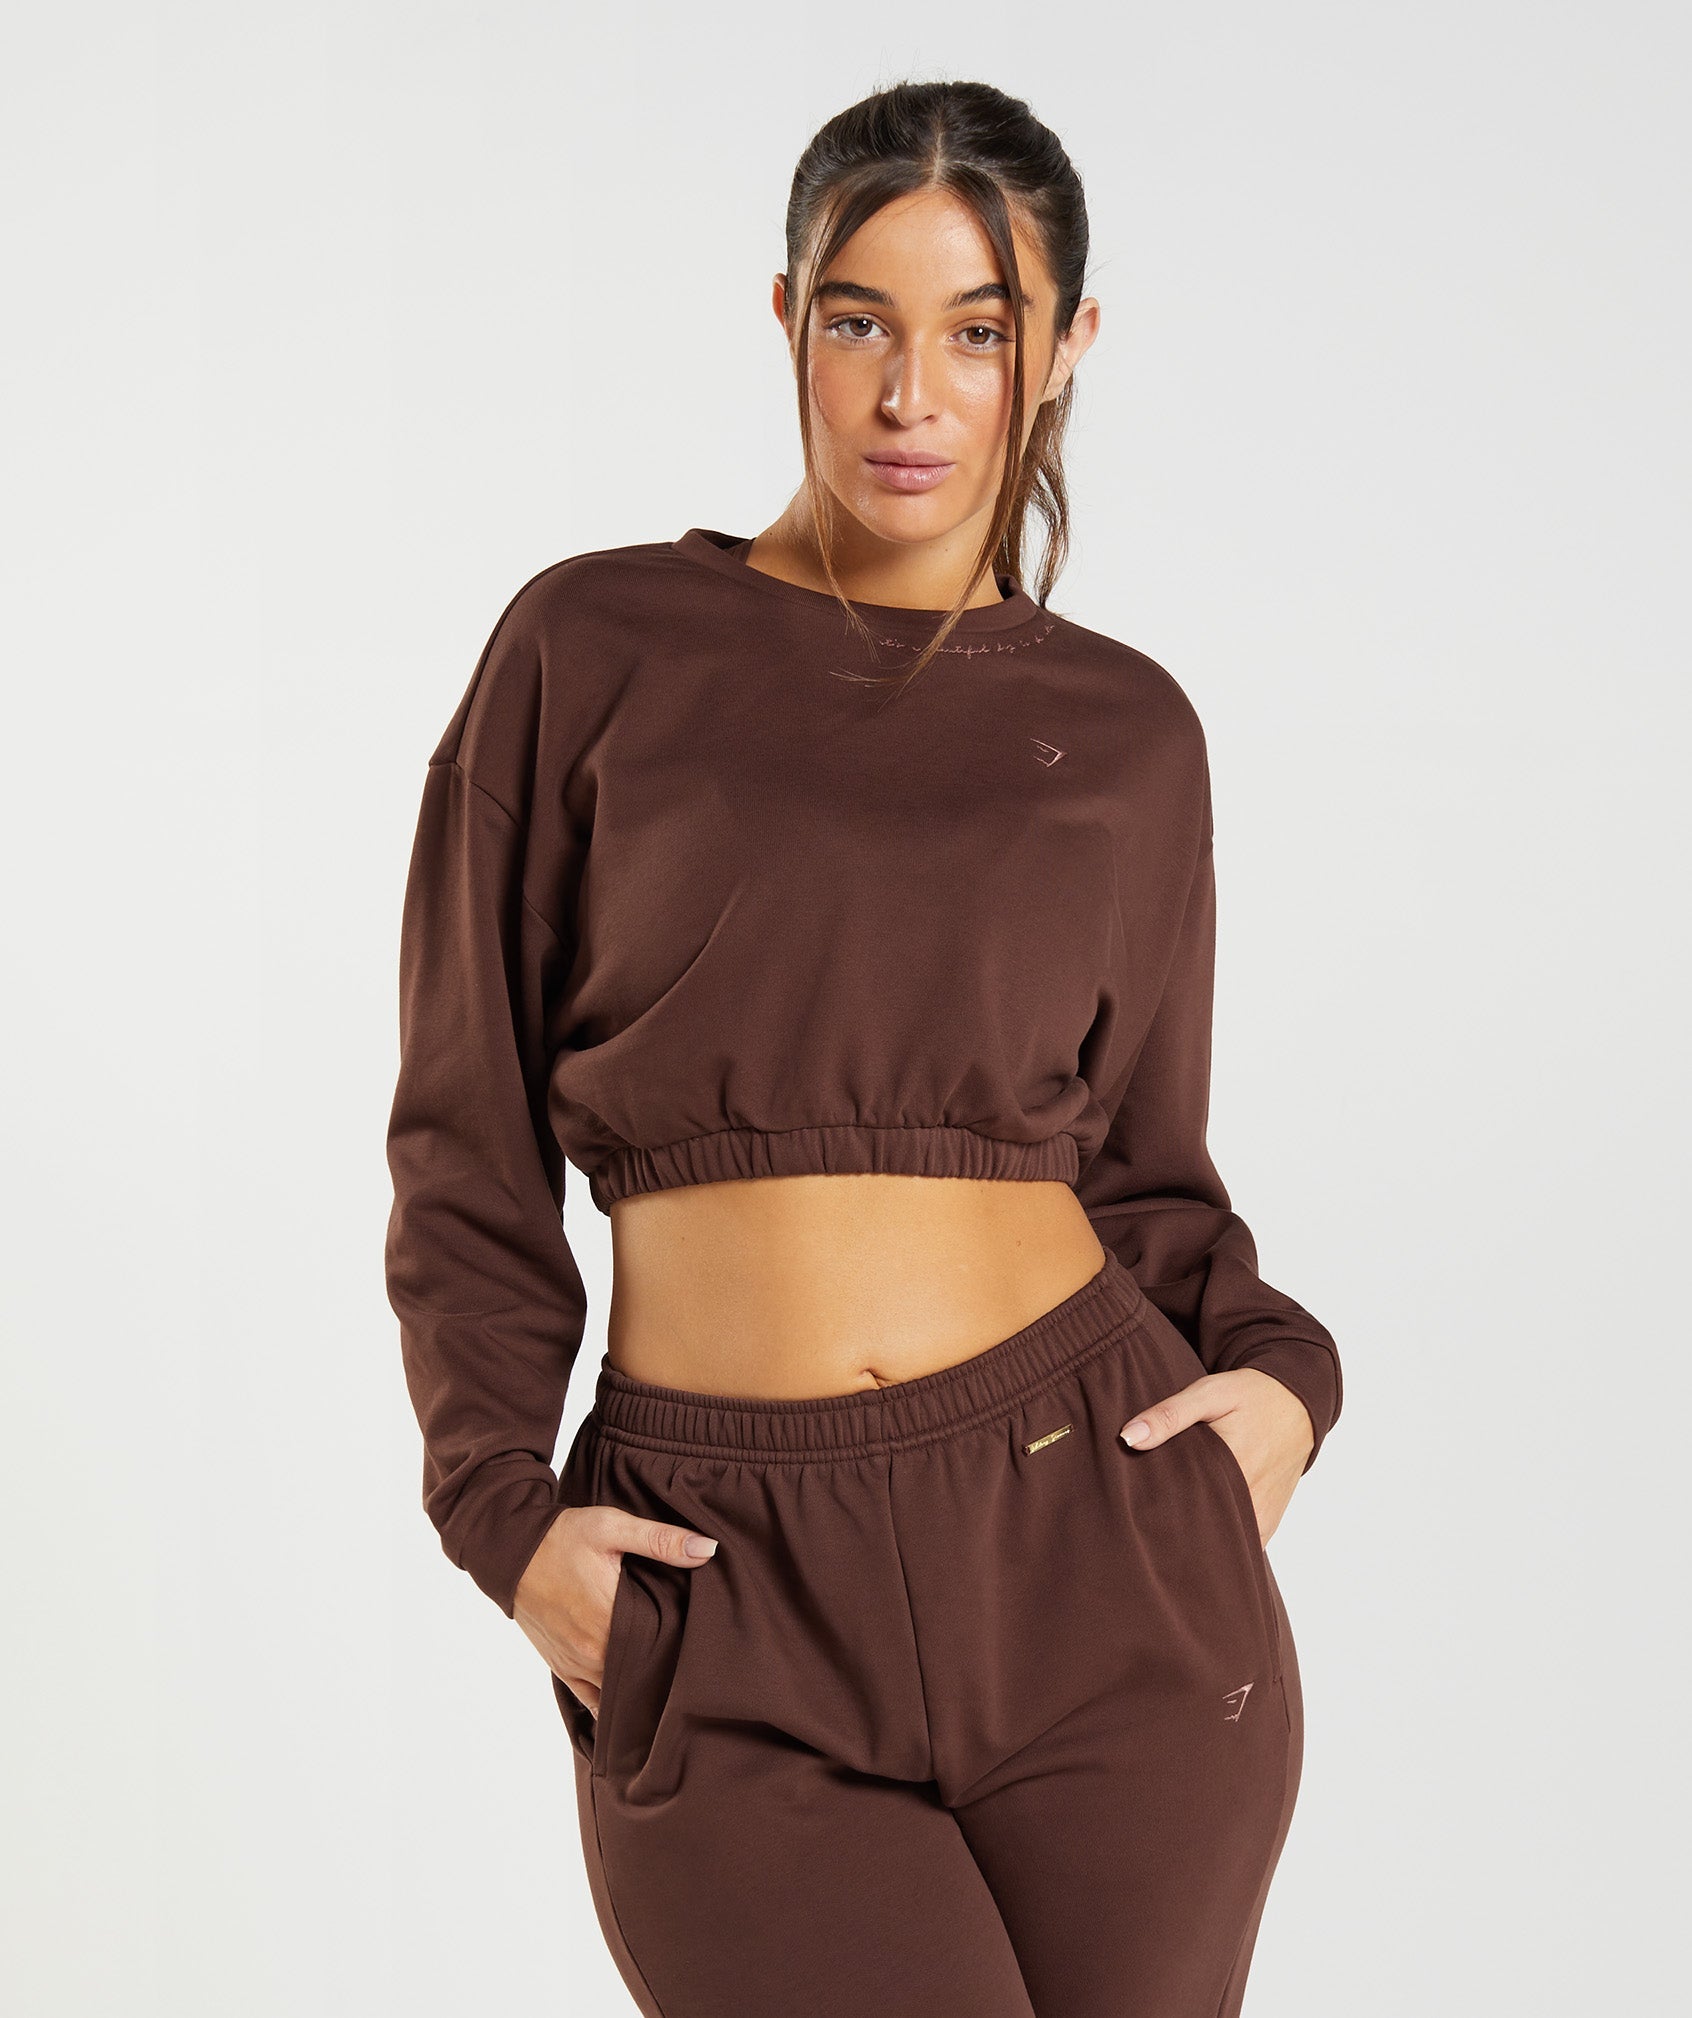 Whitney Cropped Pullover in Rekindle Brown - view 3